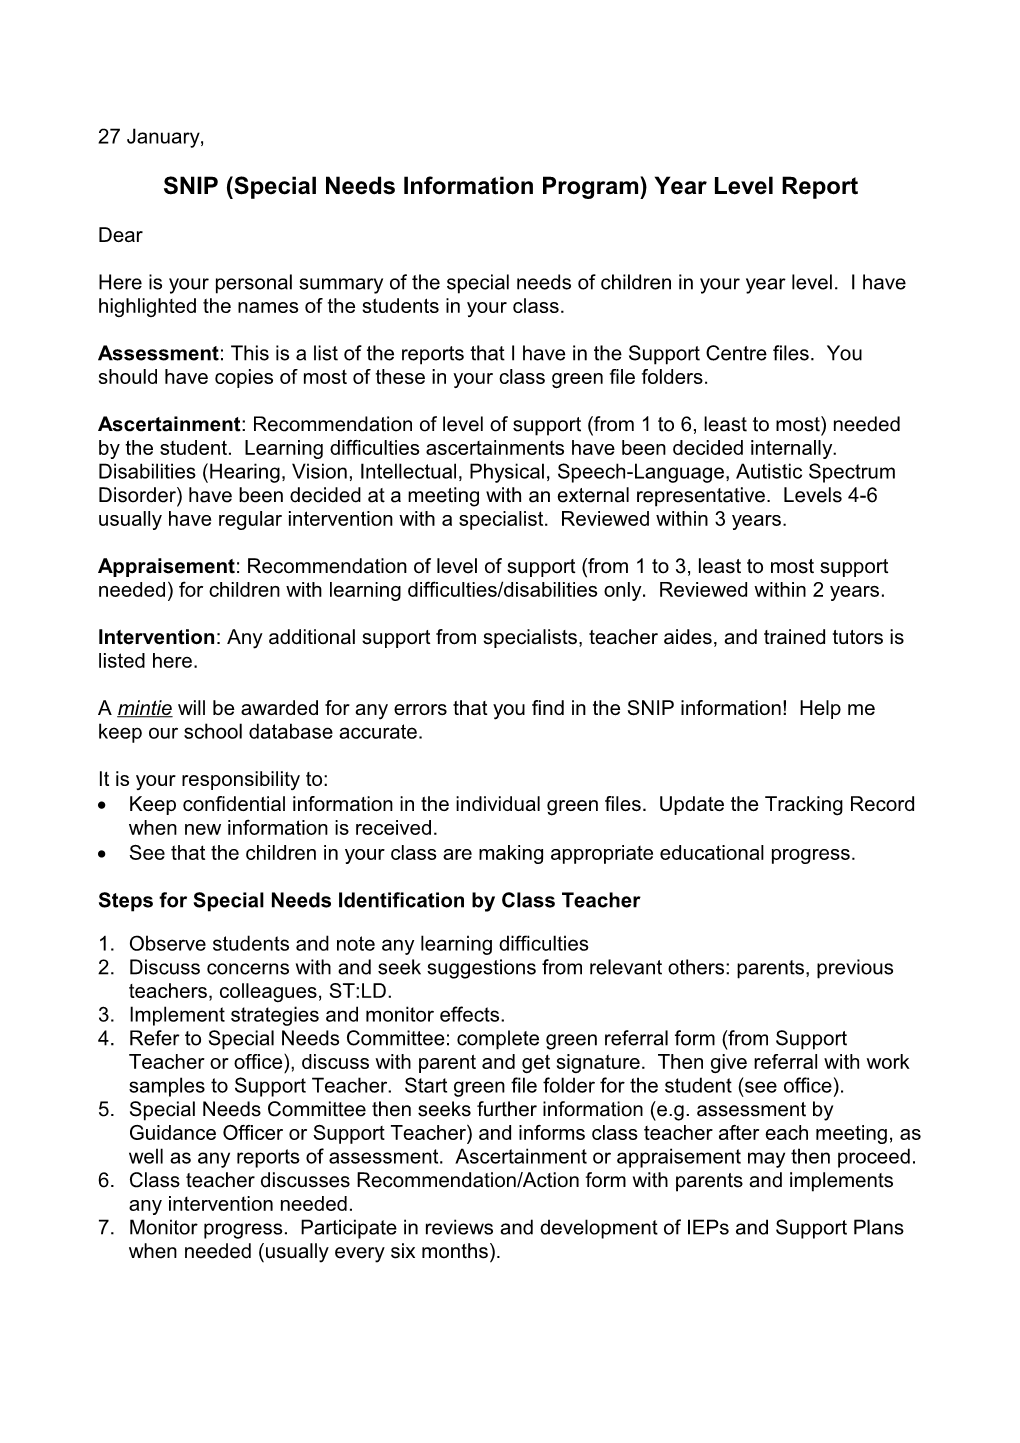 Letter for SNIP Year Level Report